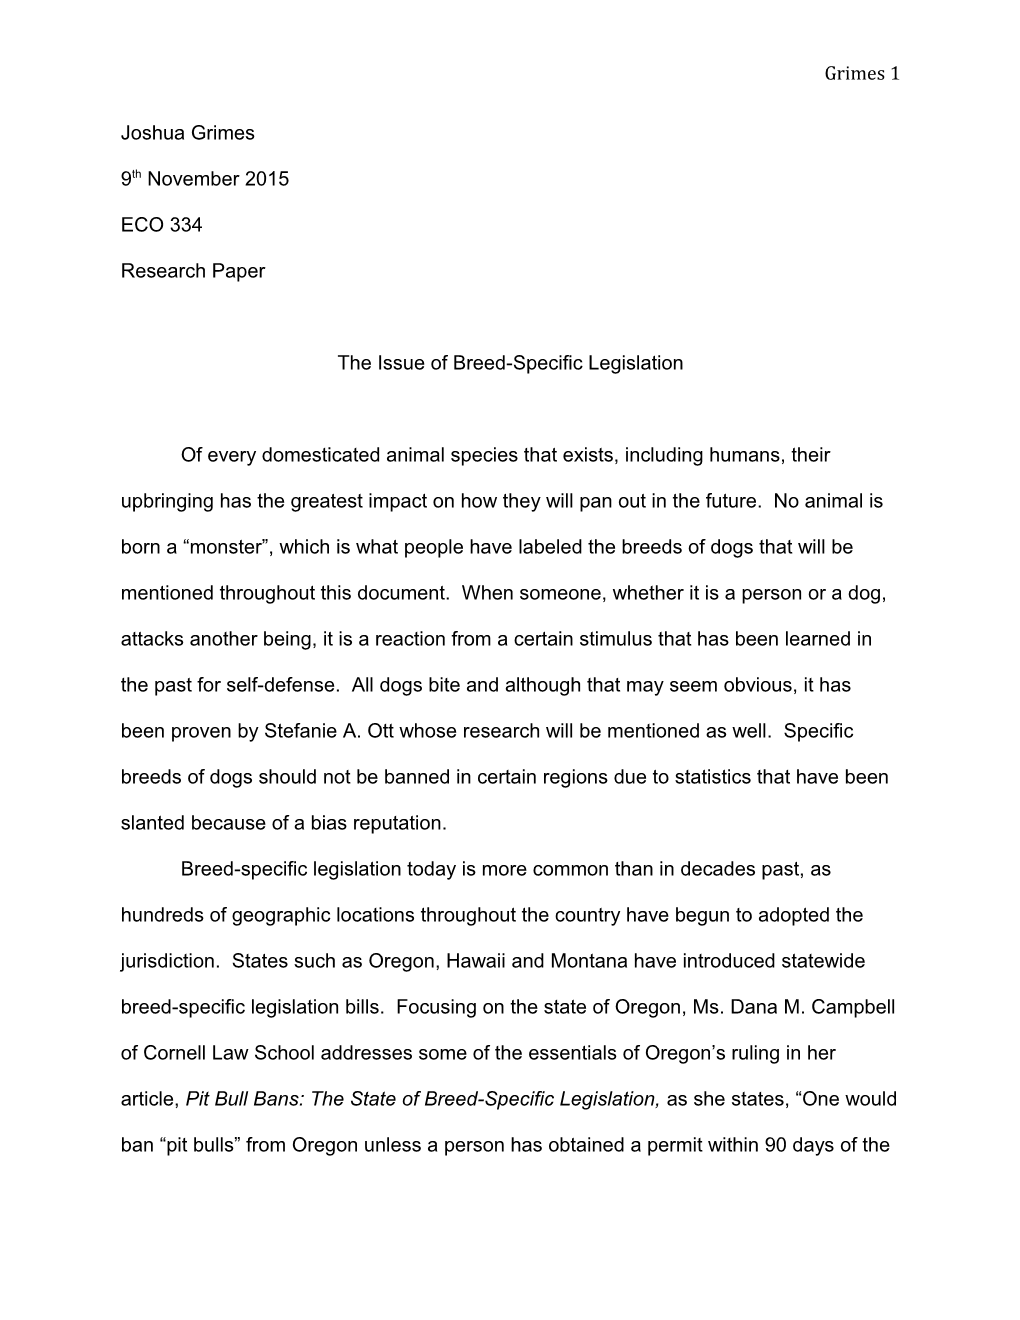 The Issue of Breed-Specific Legislation